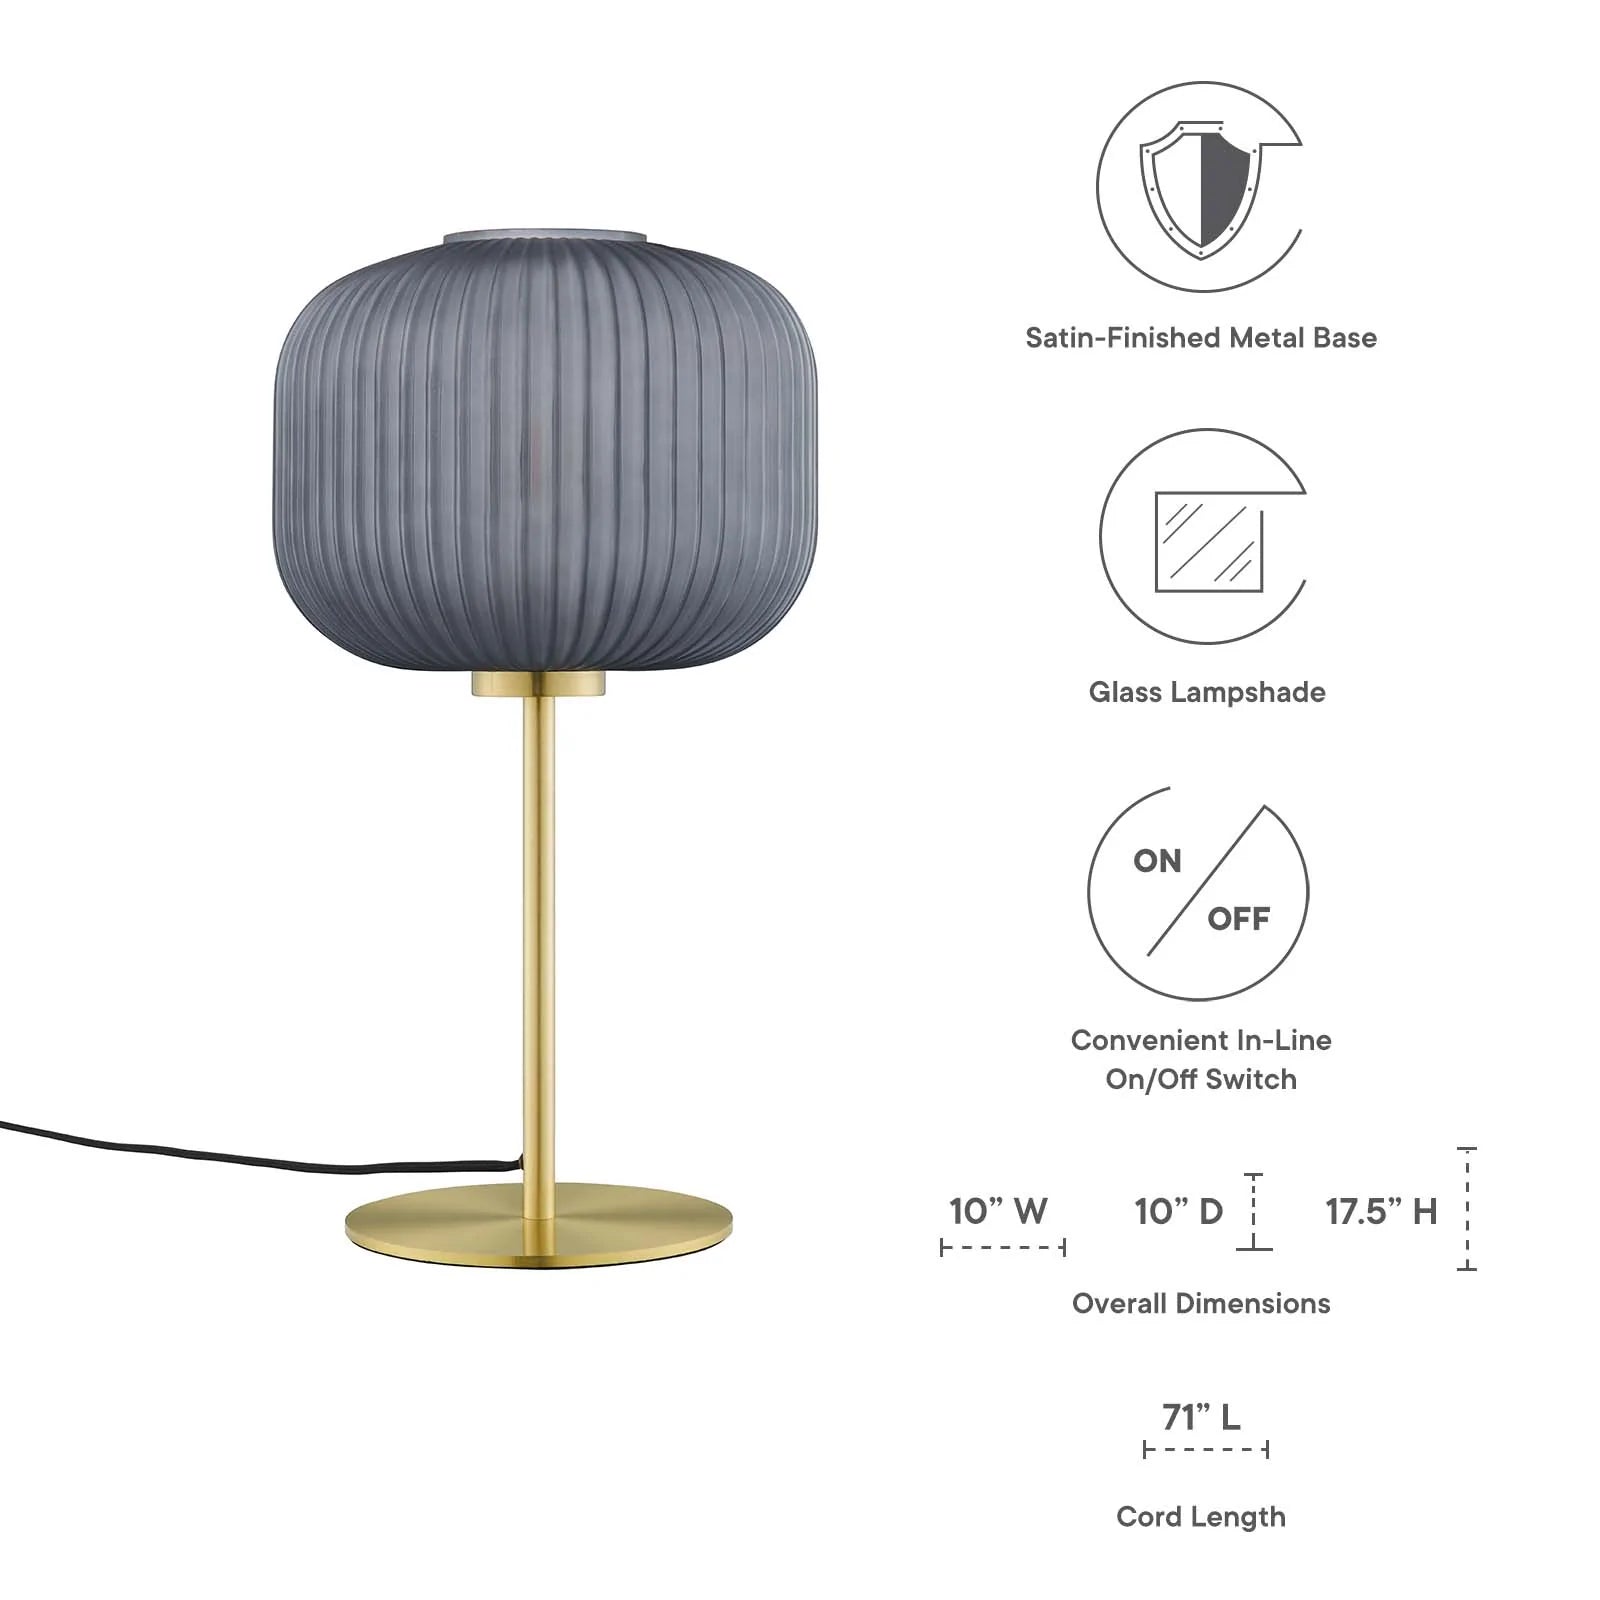 Reprise Glass Sphere And Metal Table Lamp - Black Satin Brass